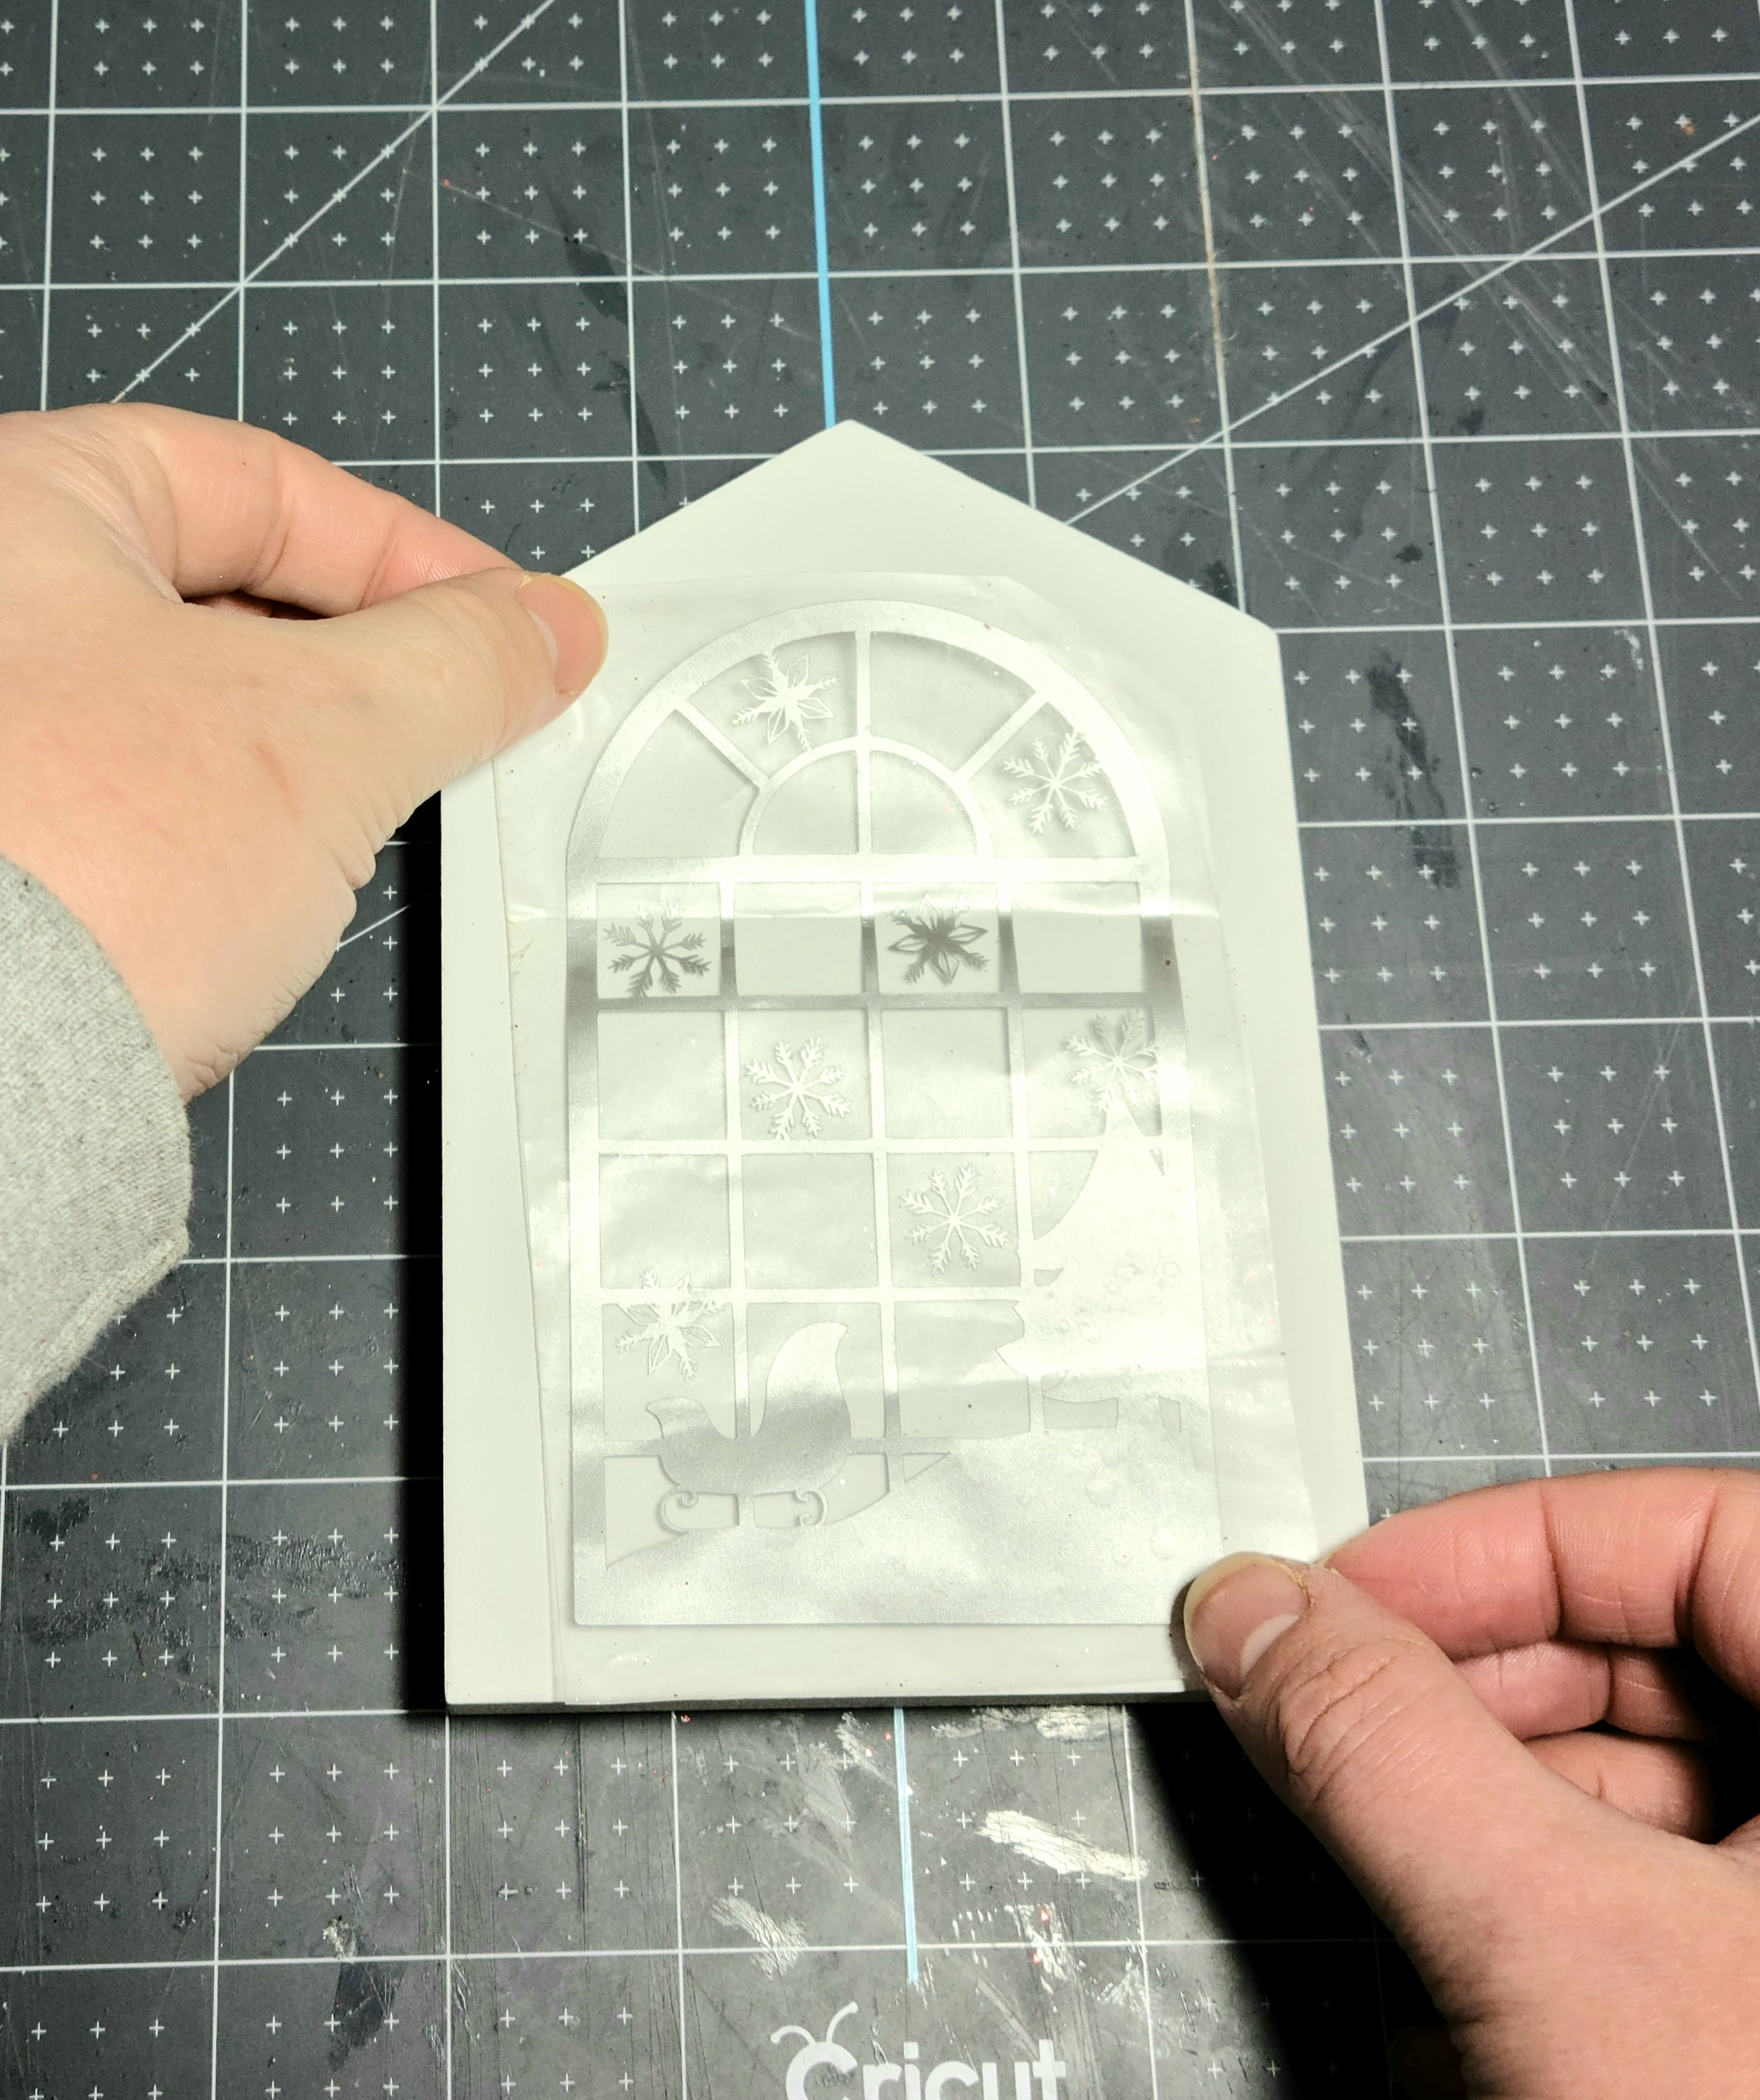 Placing the design on the contact paper on the Dollar Tree Christmas house.